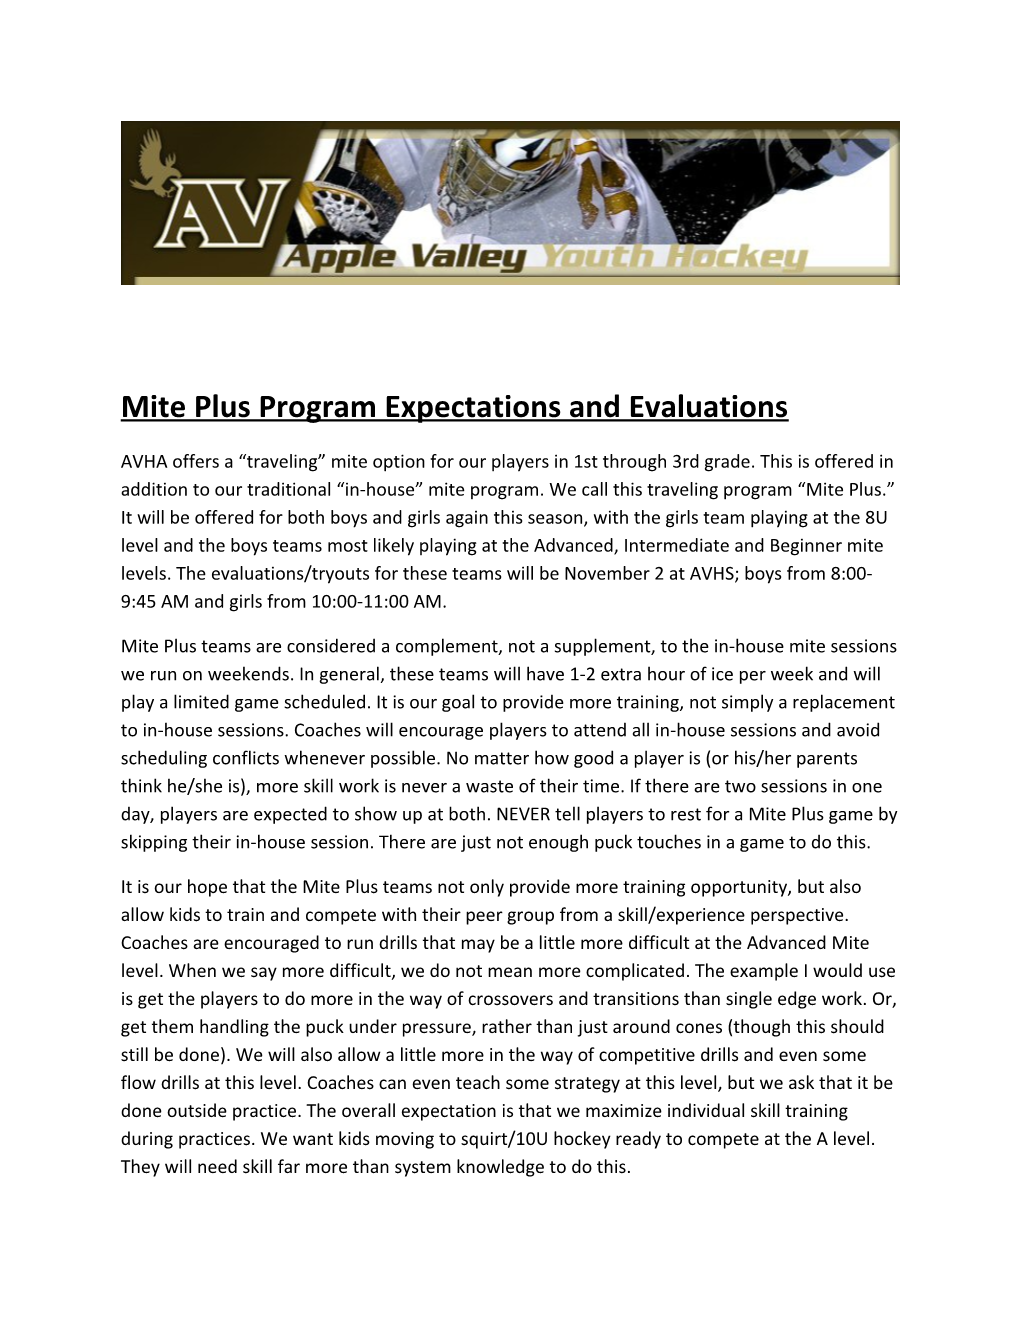 Mite Plus Program Expectations and Evaluations